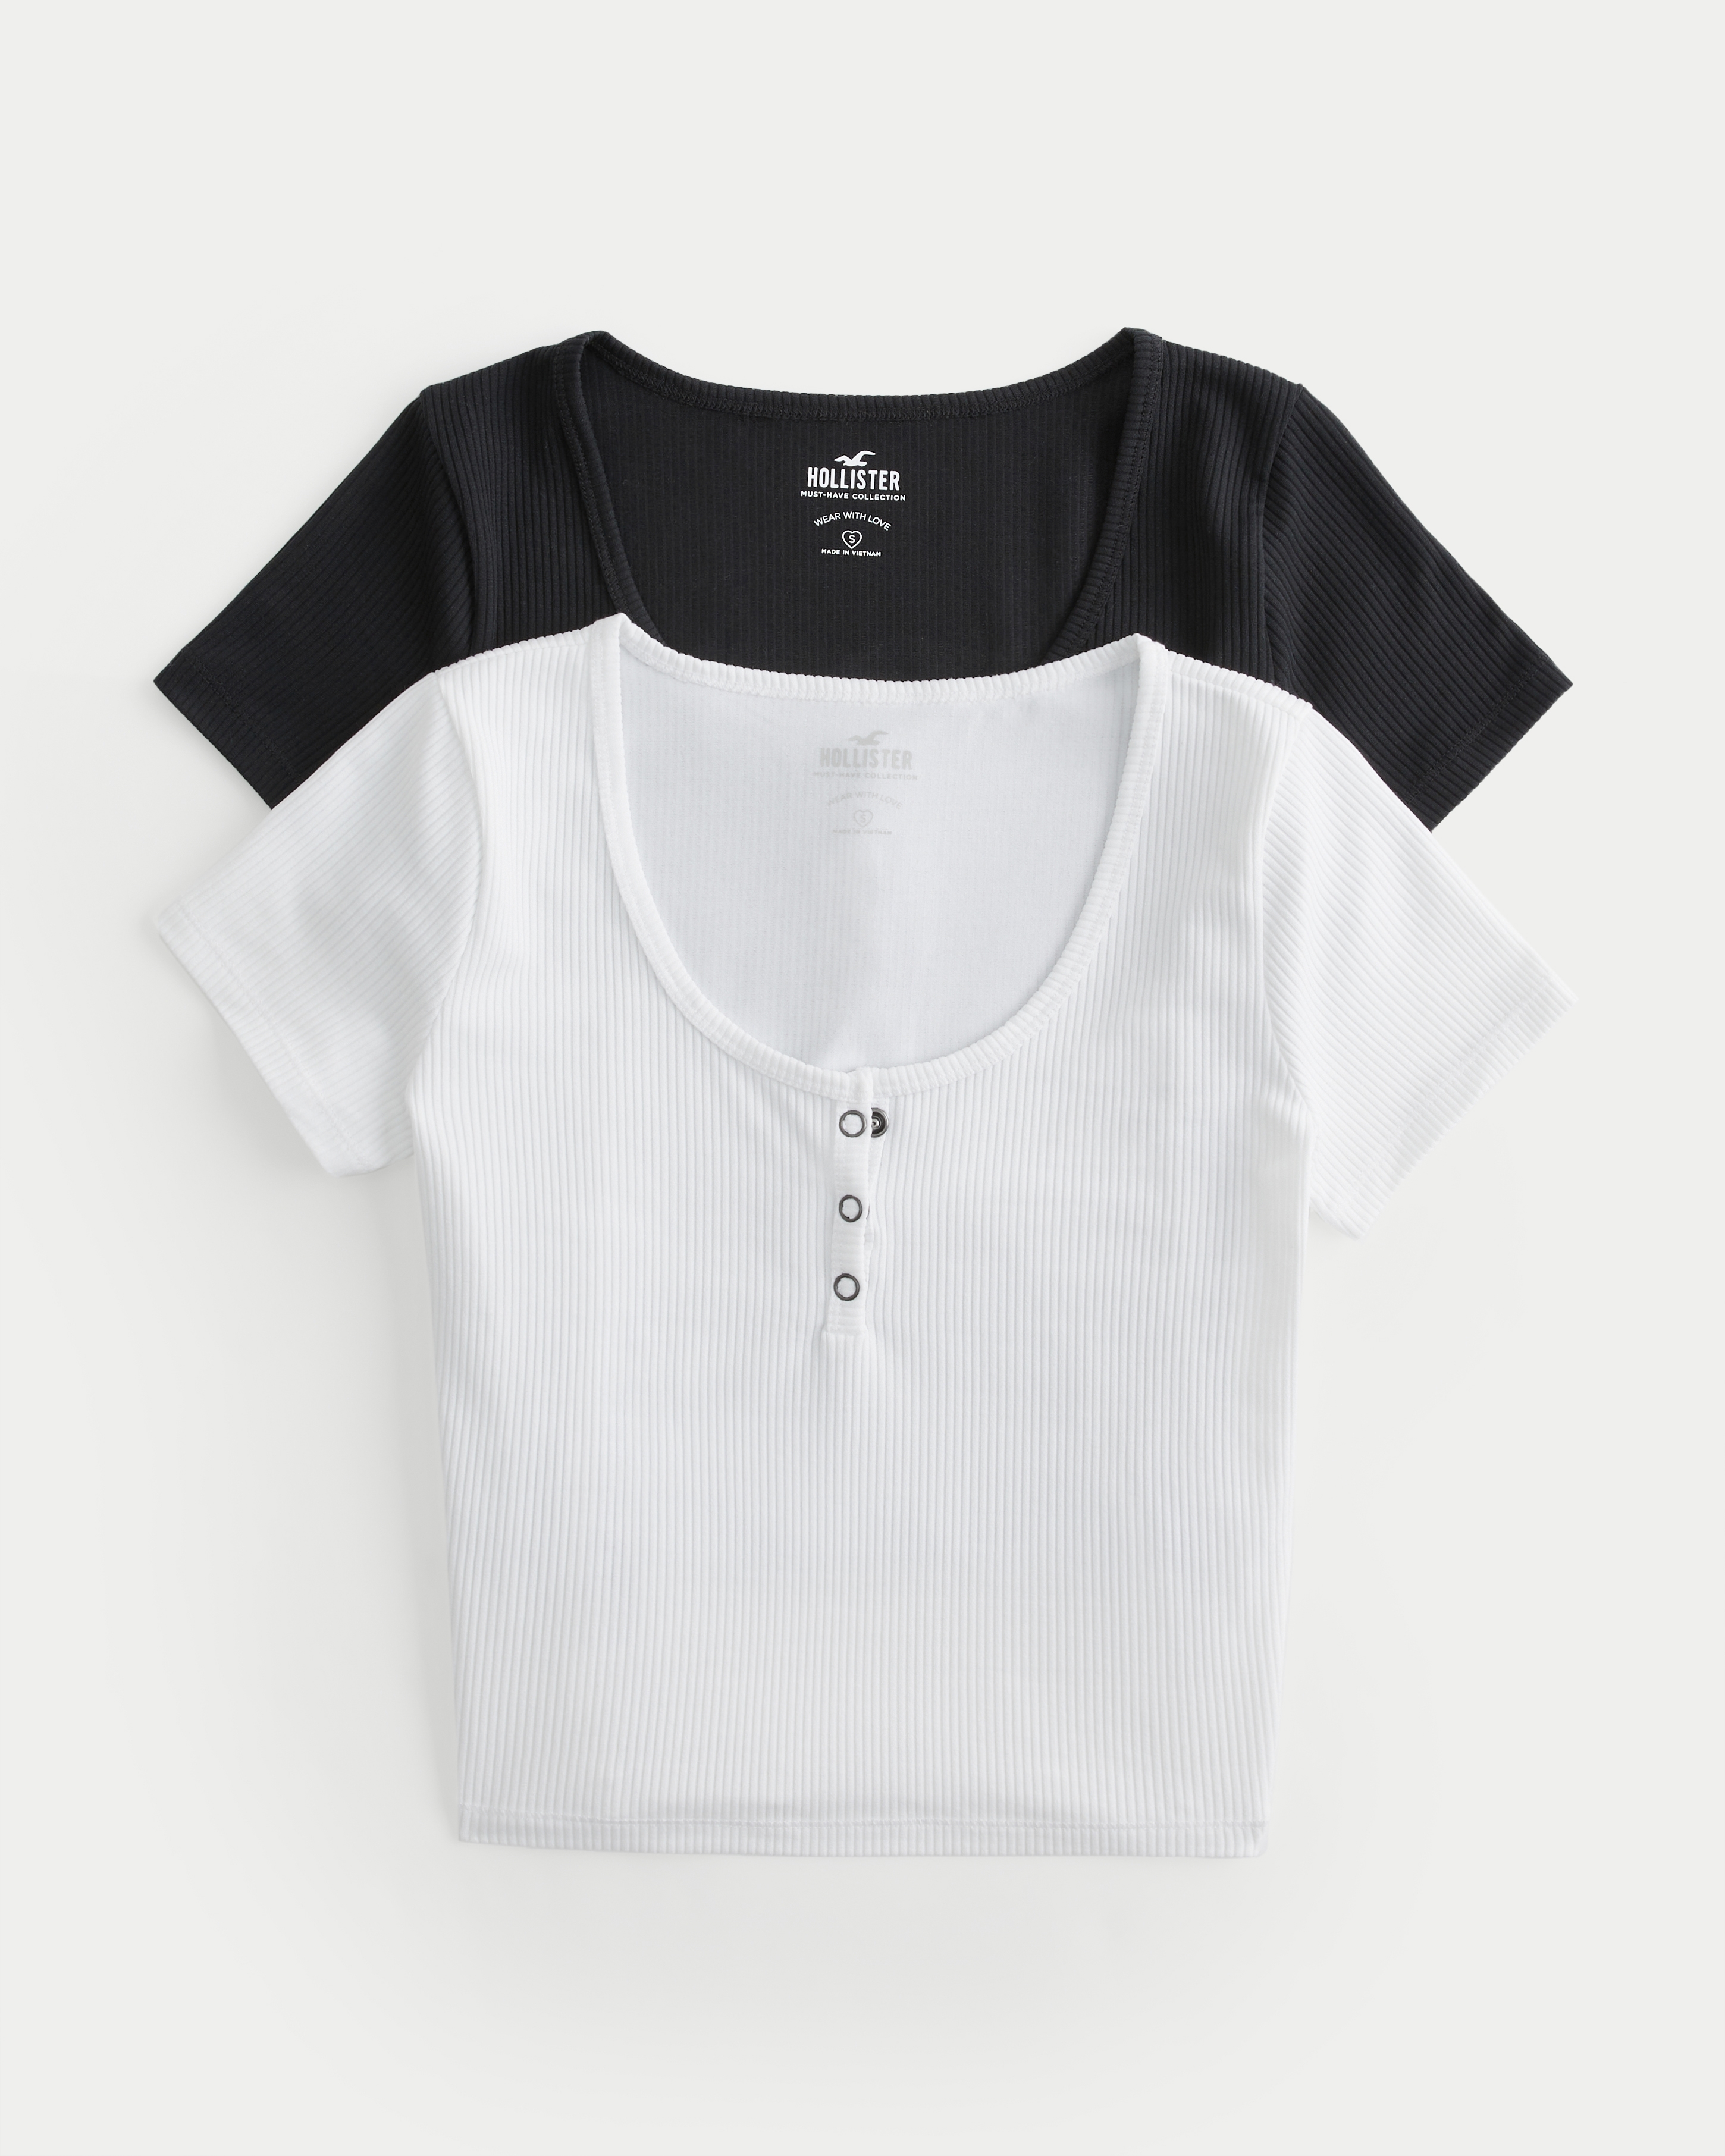 Hollister cap sleeve top in white